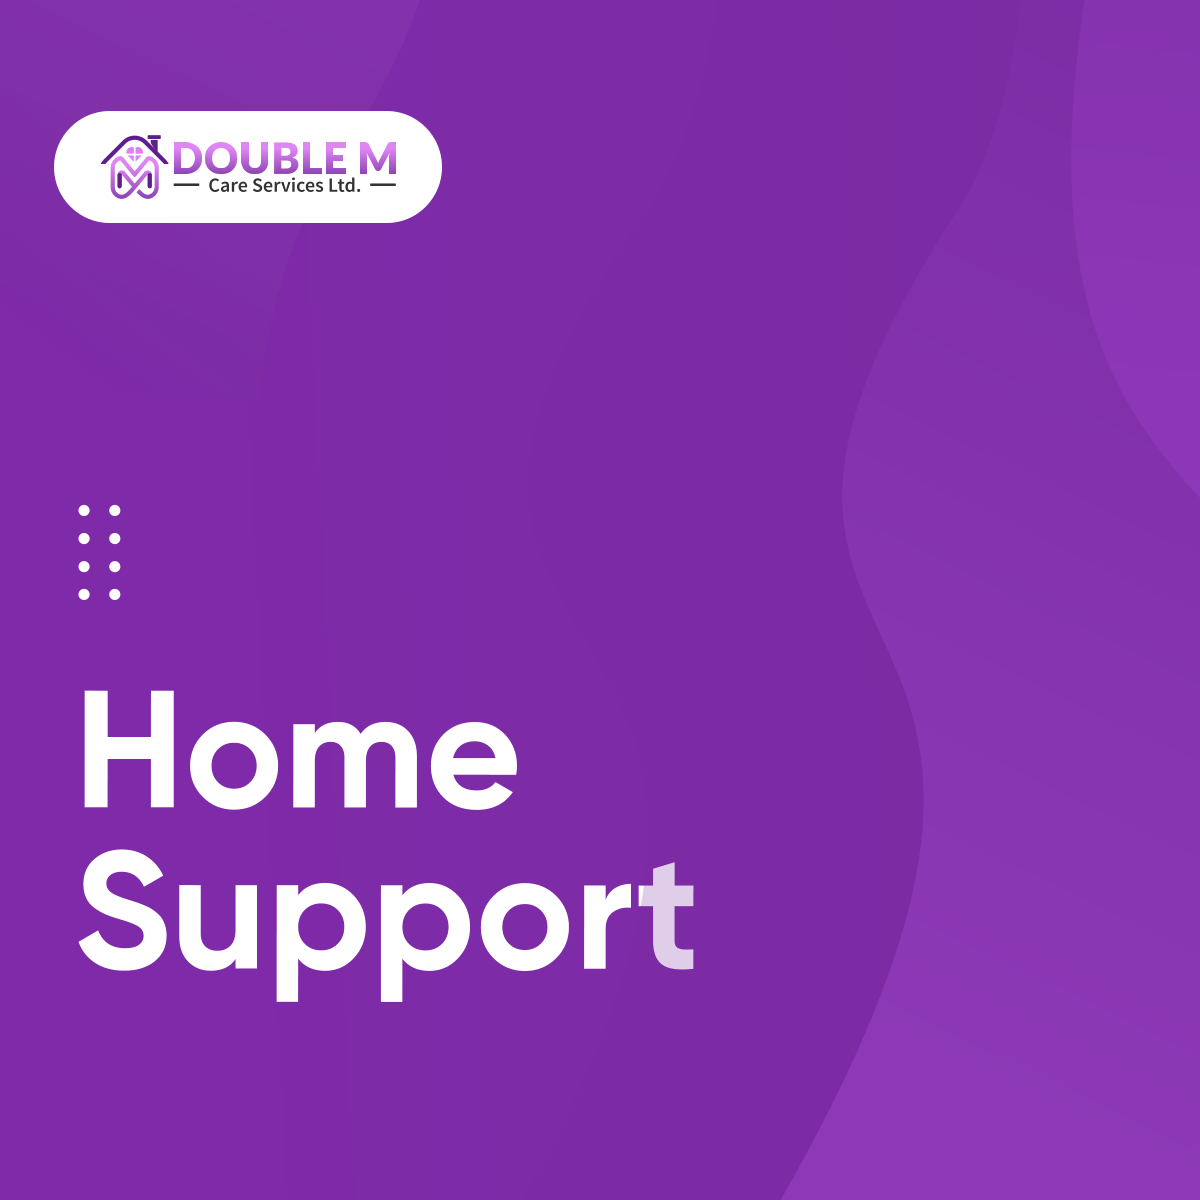 We support individuals living at home by assisting in their daily tasks or errands. We make sure they are comfortable and safe, free from stress. We also provide companion care and emergency care in times of health crisis.
 
#HomeSupport #Assistance #DoubleMCareServicesLtd